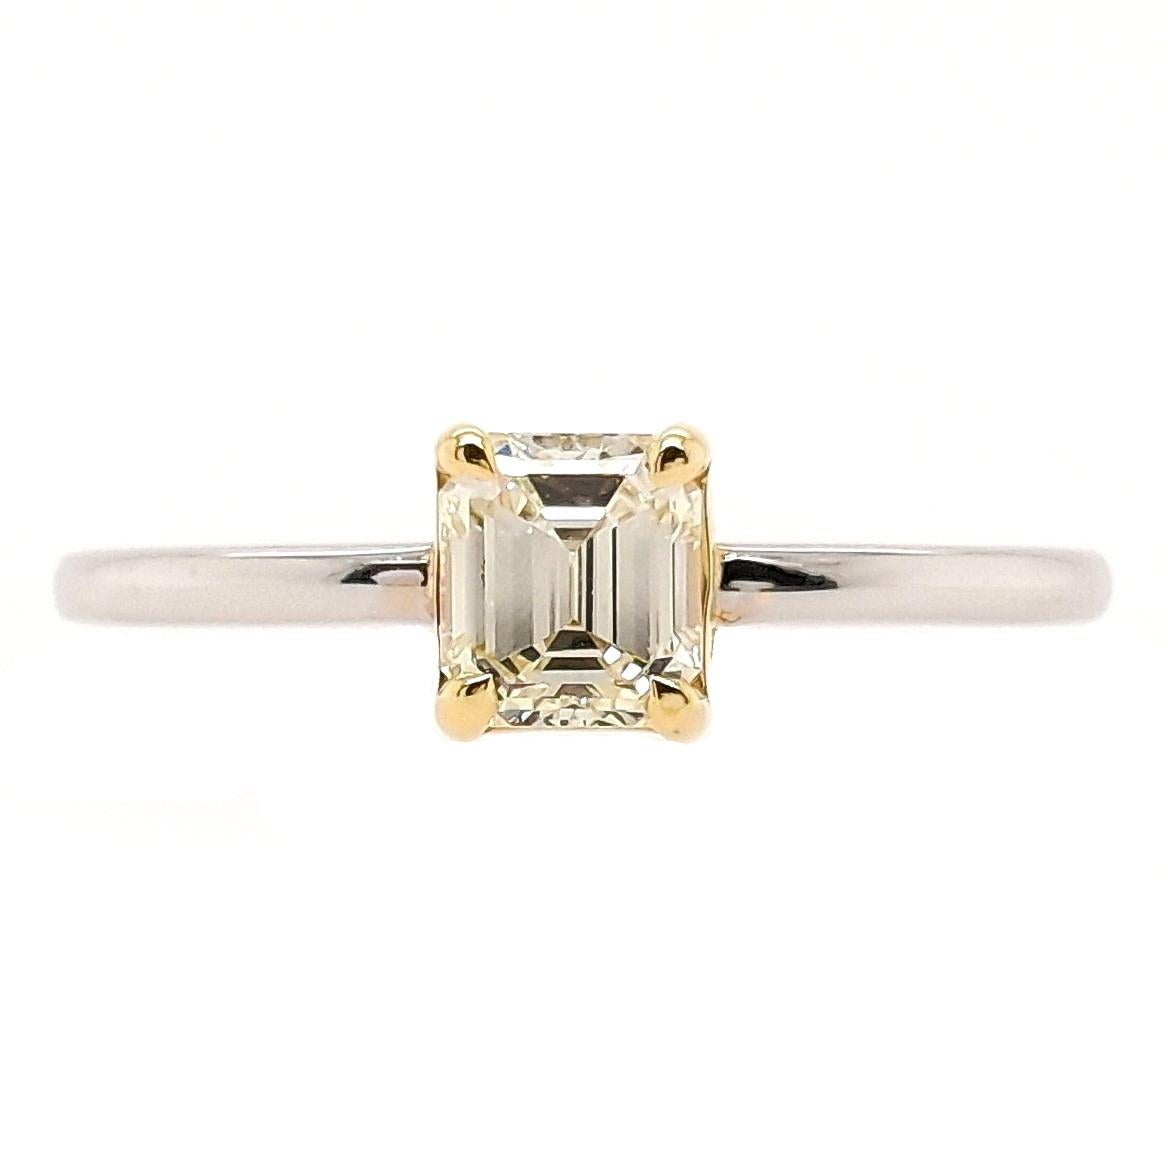 This is a gorgeous natural light-yellow diamond ring with VS clarity in emerald-cut shape. This special ring made of 14K yellow & white gold, has a classic appeal that will never go out of style.

This ring is certified by IGI laboratory, report